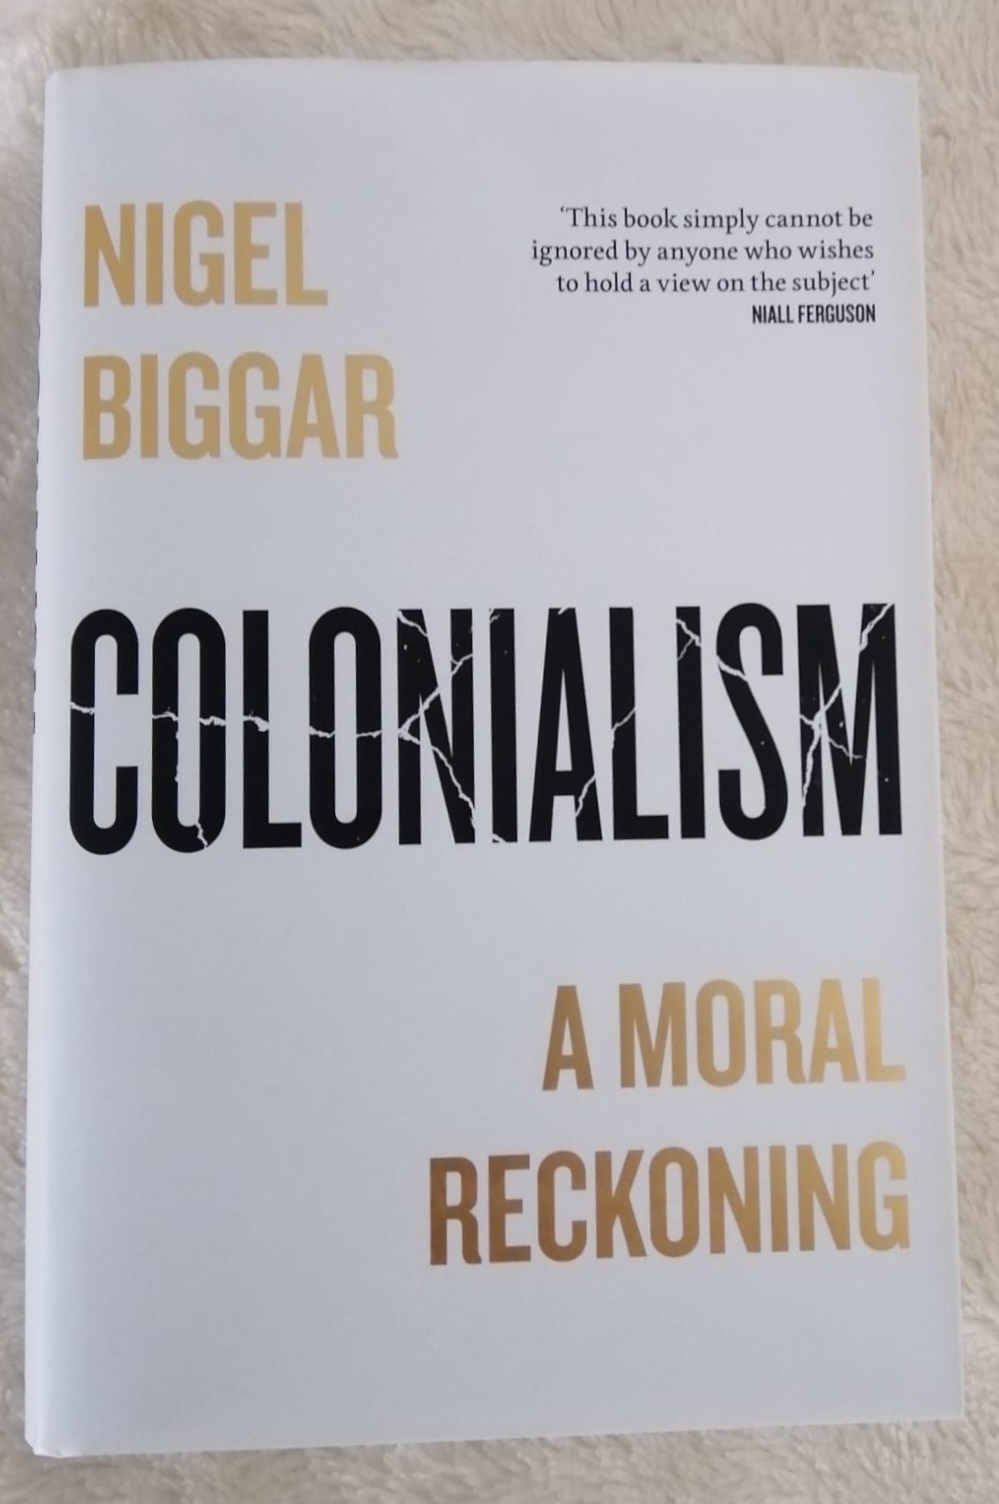 Colonialism - A Moral Reckoning. Photo of book